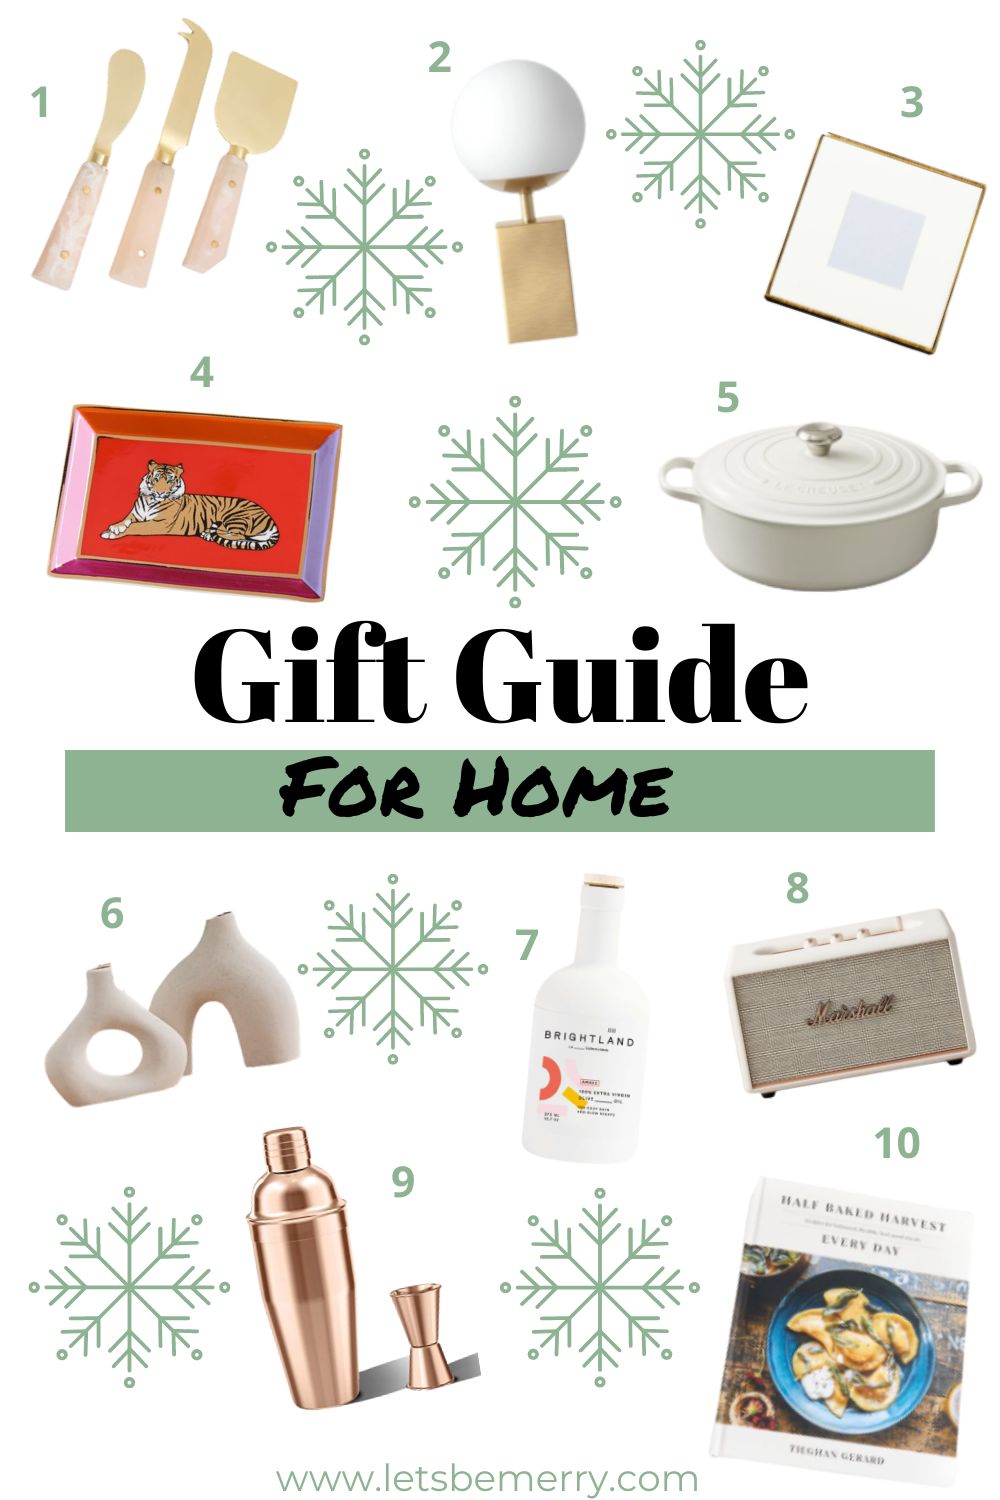 Gift Guide 2022 - Best Holiday Gift Ideas to Shop Now